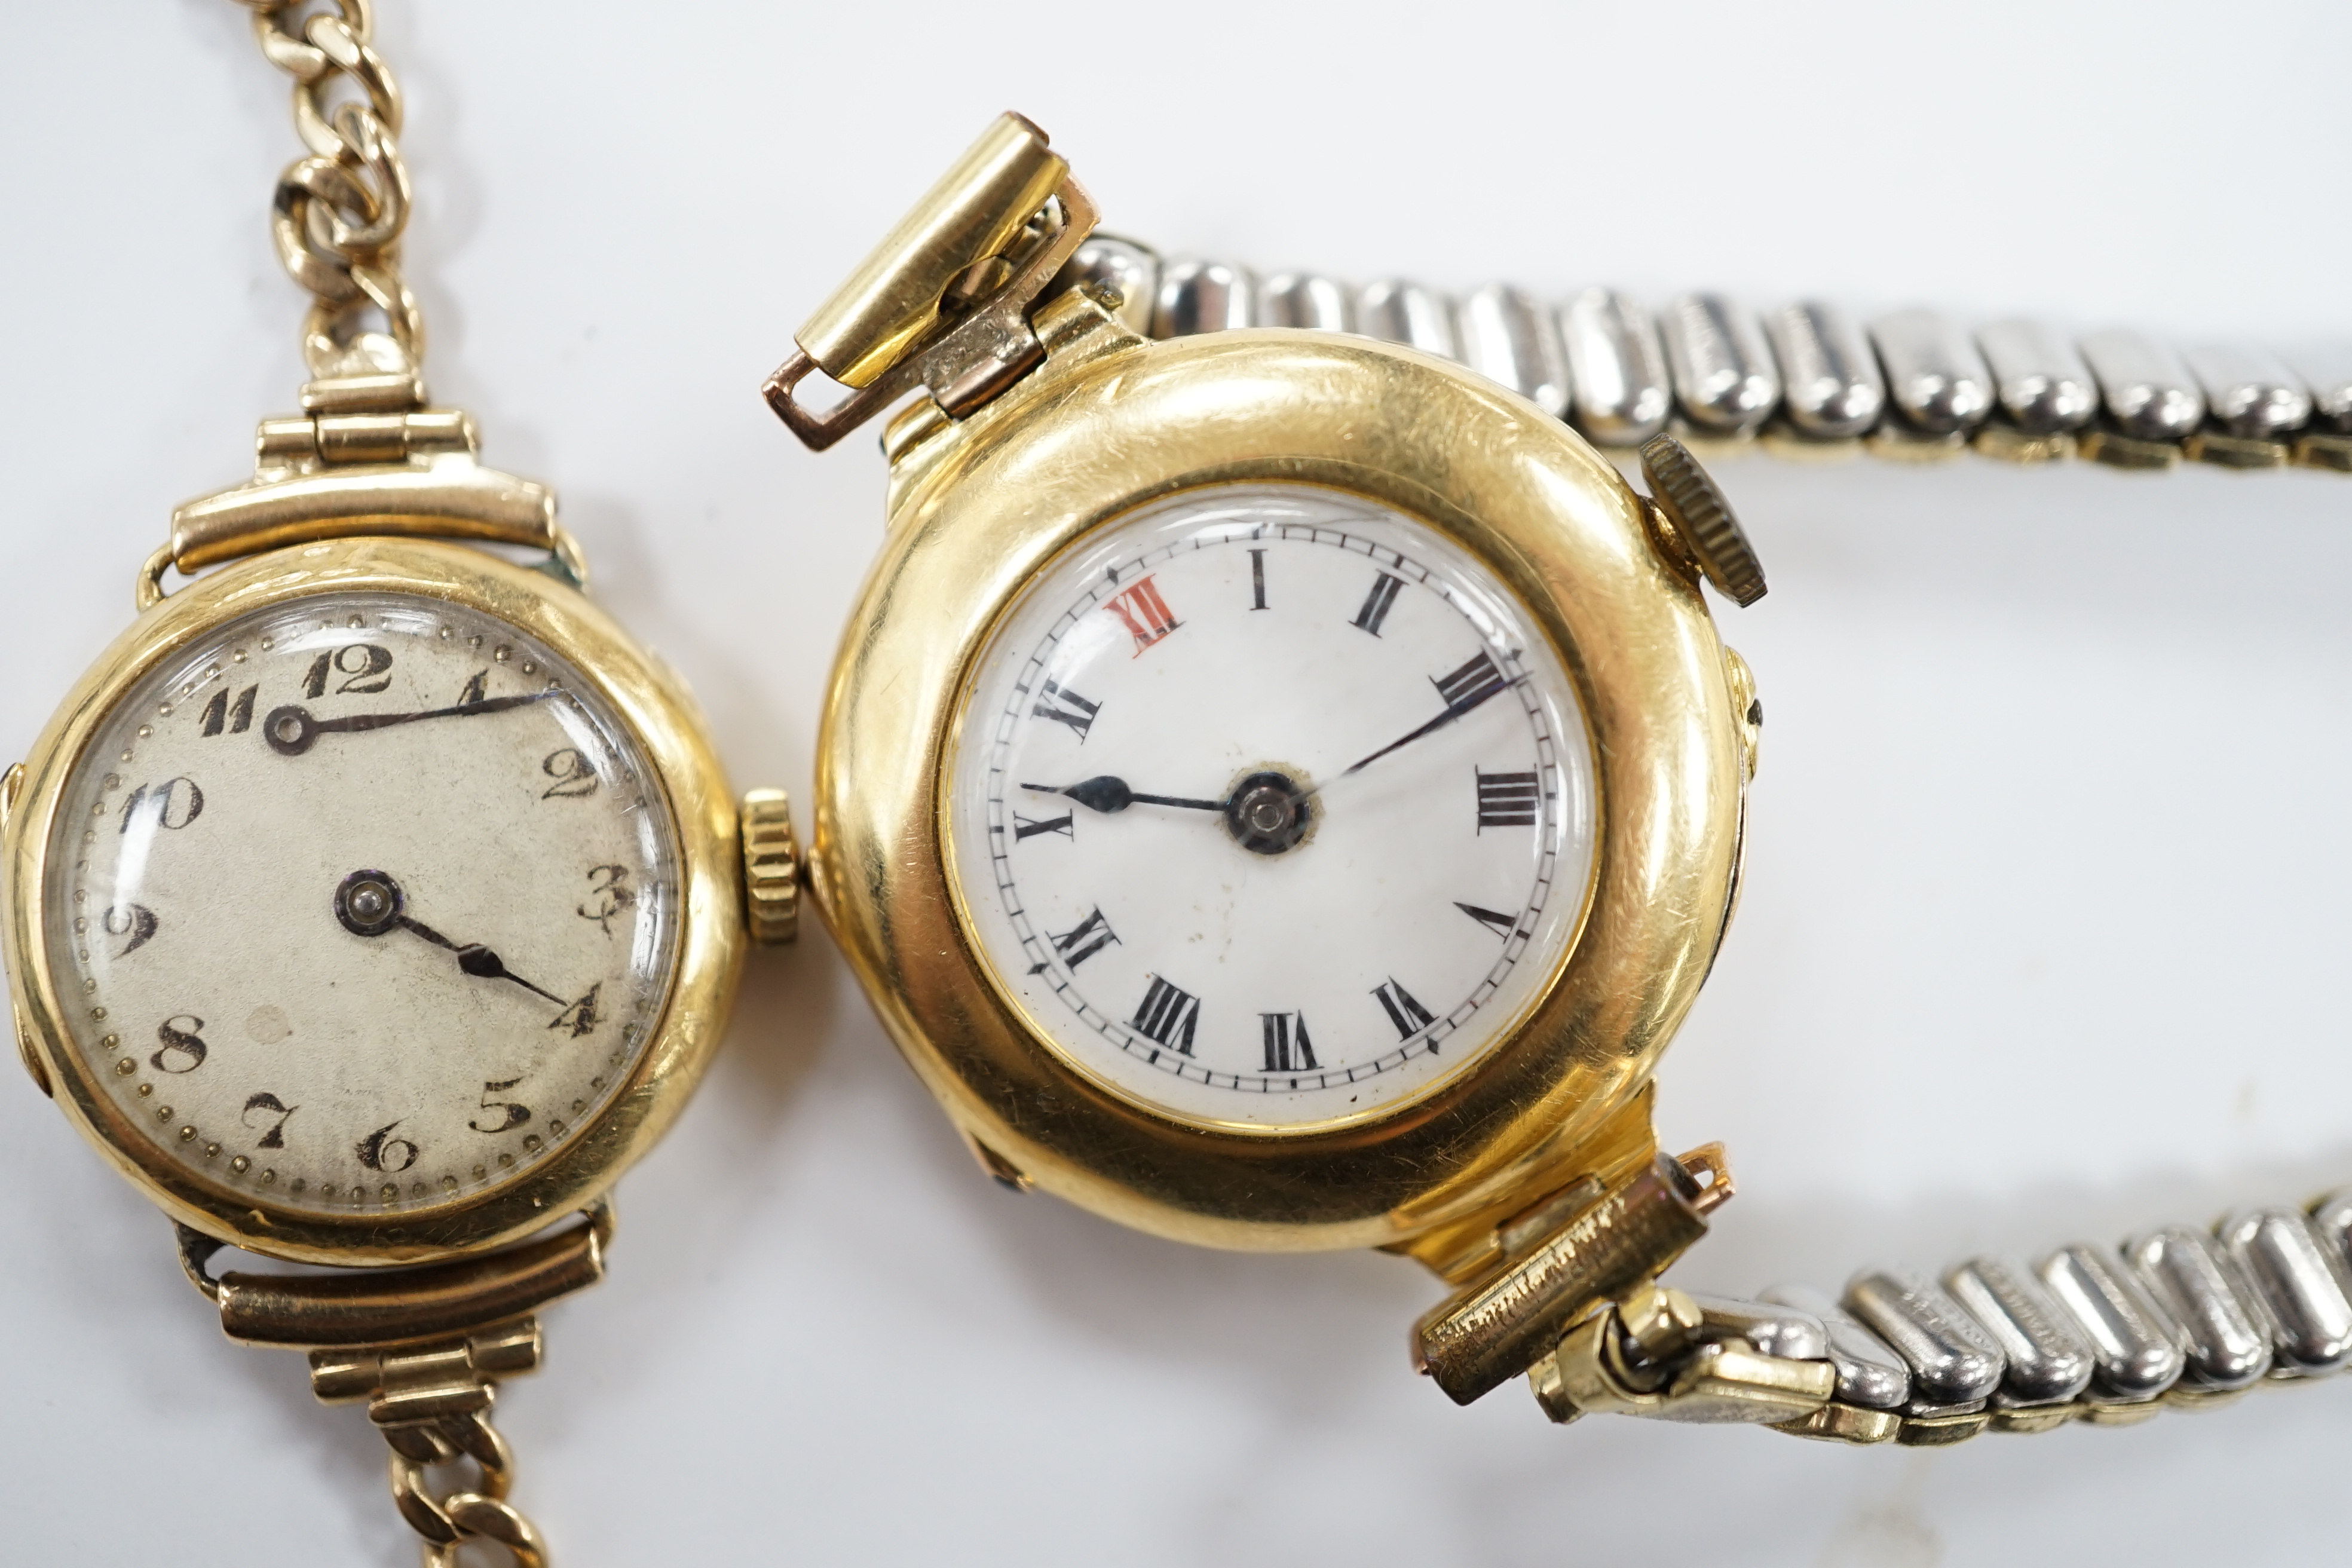 A lady's early to mid 20th century 18ct gold manual wind wrist watch on a 9ct bracelet, together with one other similar 18ct gold manual wrist watch, on a flexible gold plated flexible bracelet.